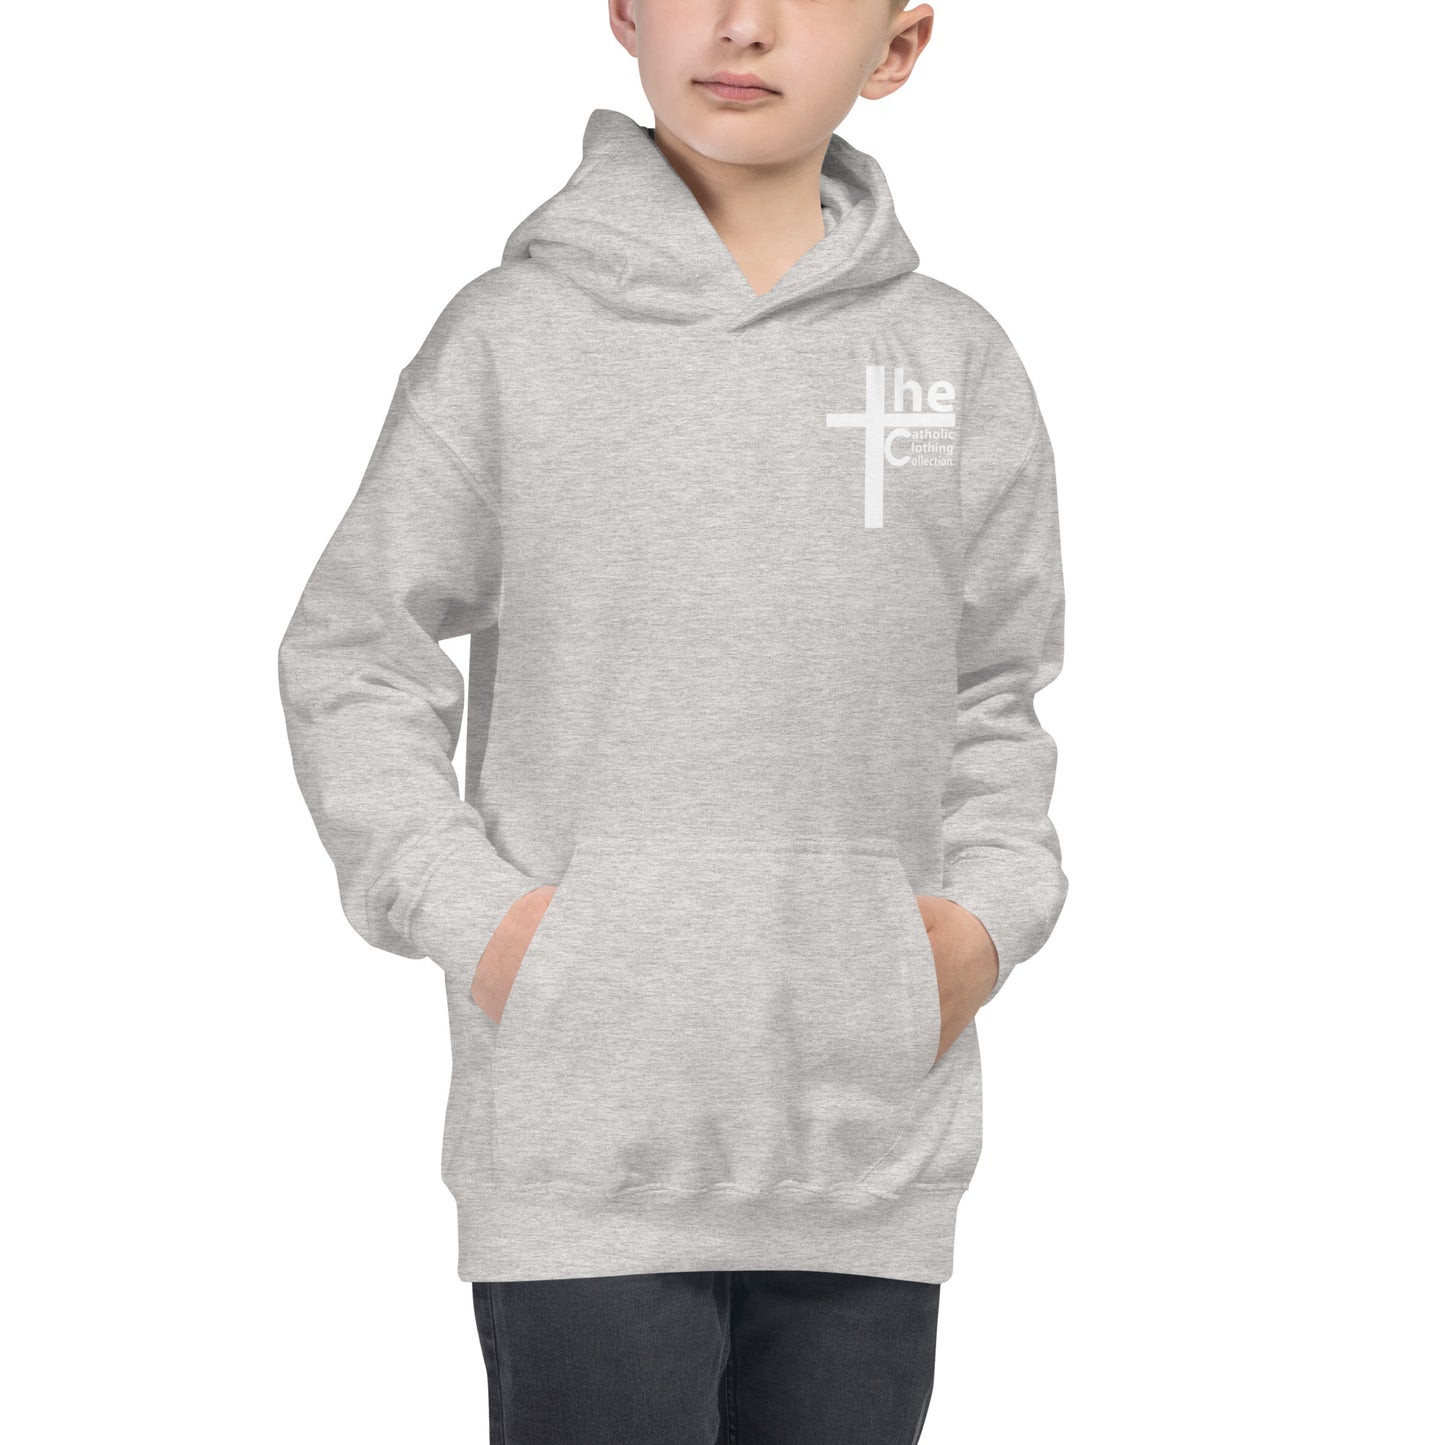 Our Lady of Fatima Children's Hoodie